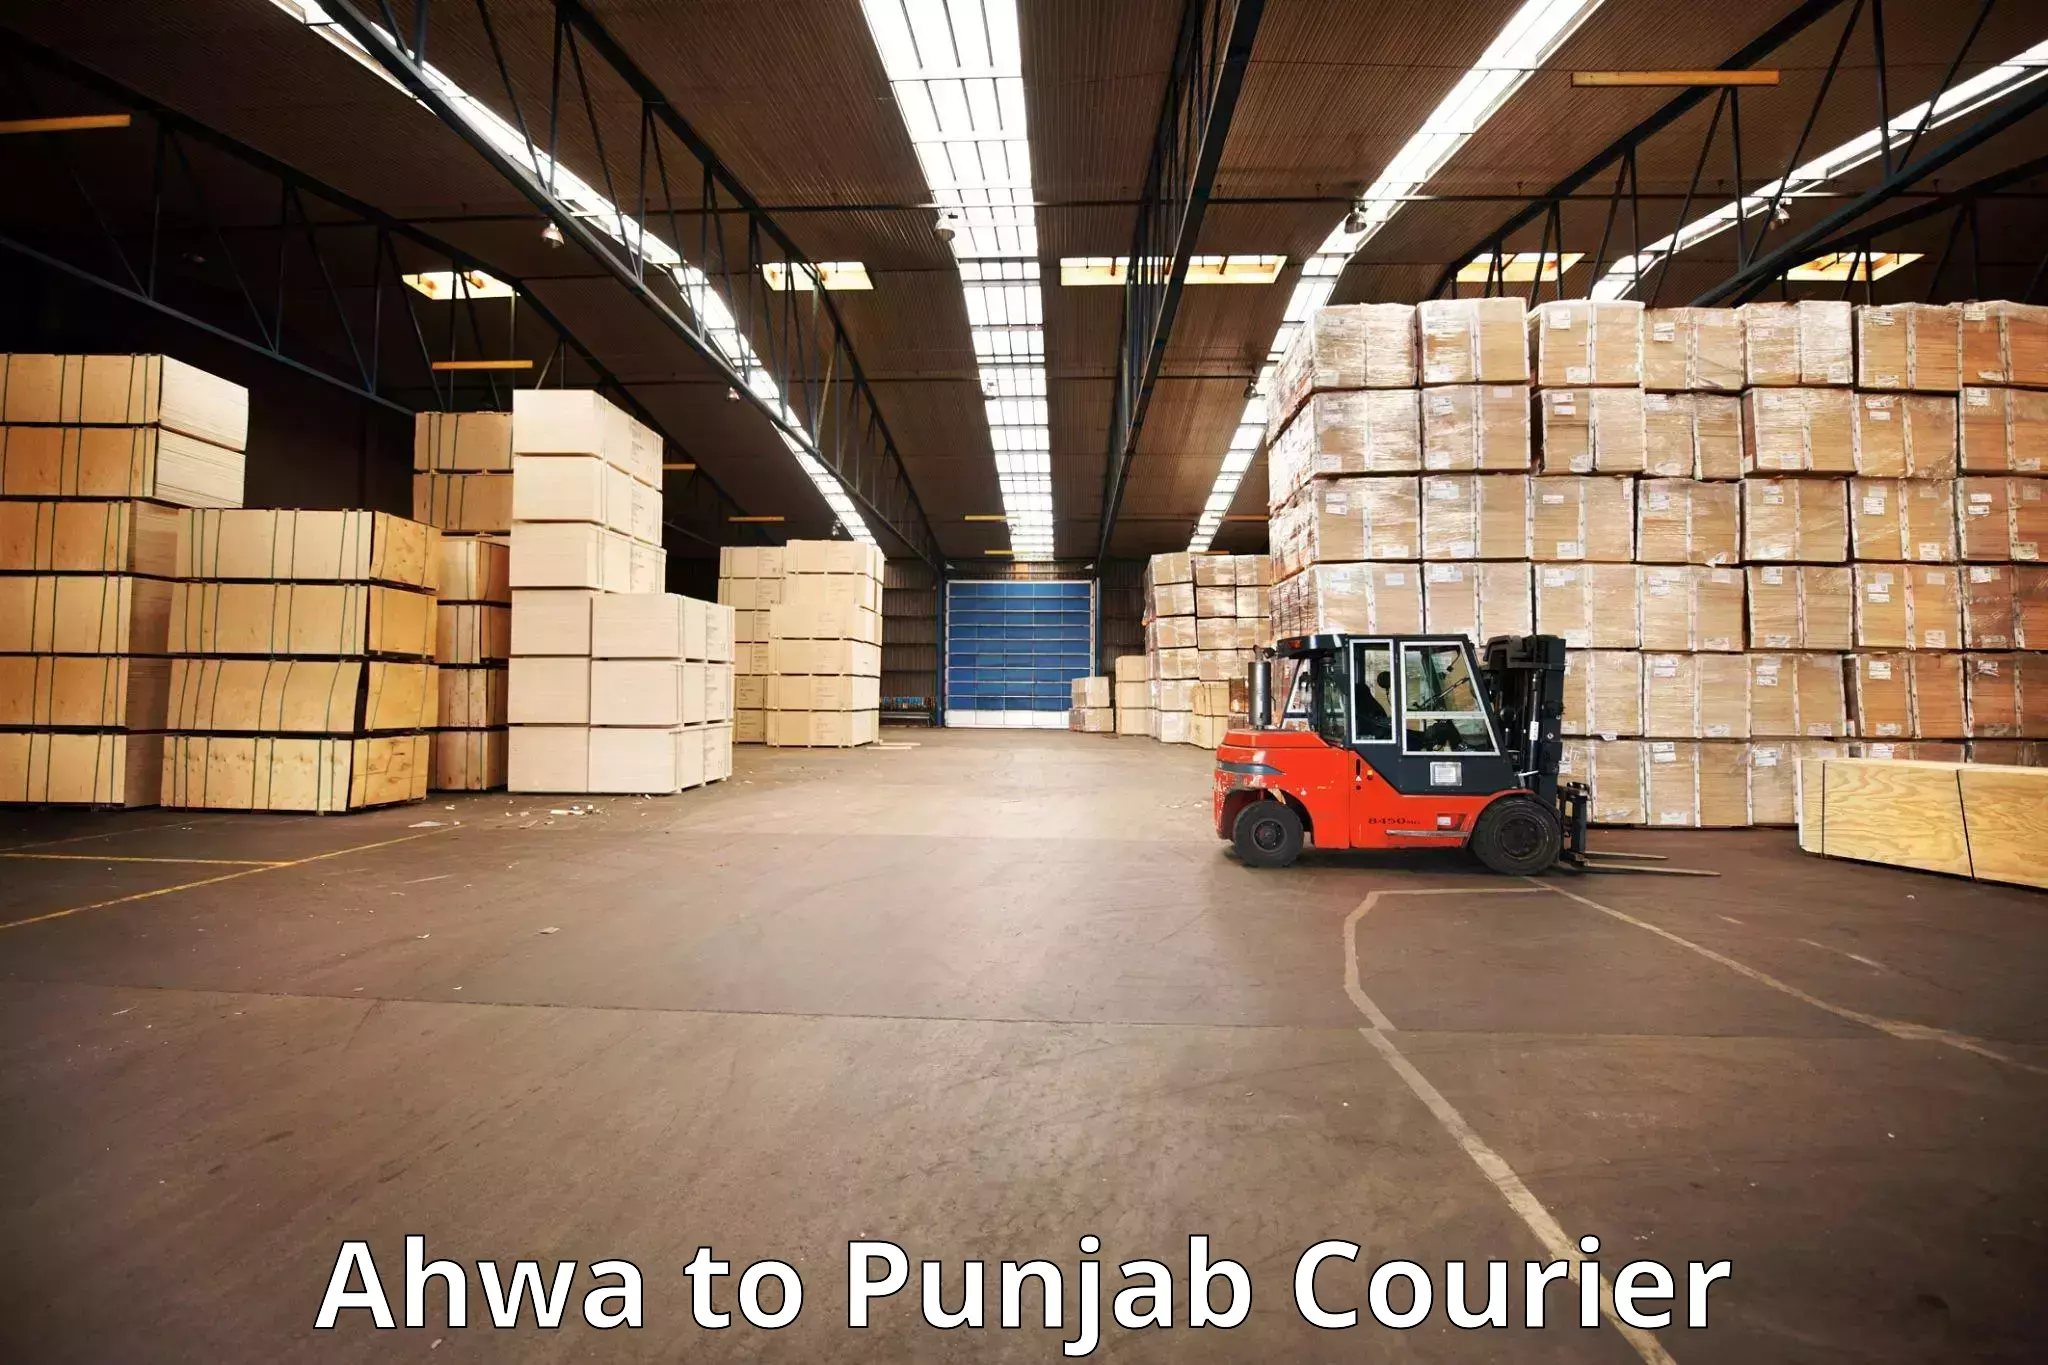 Luggage shipment specialists Ahwa to Punjab